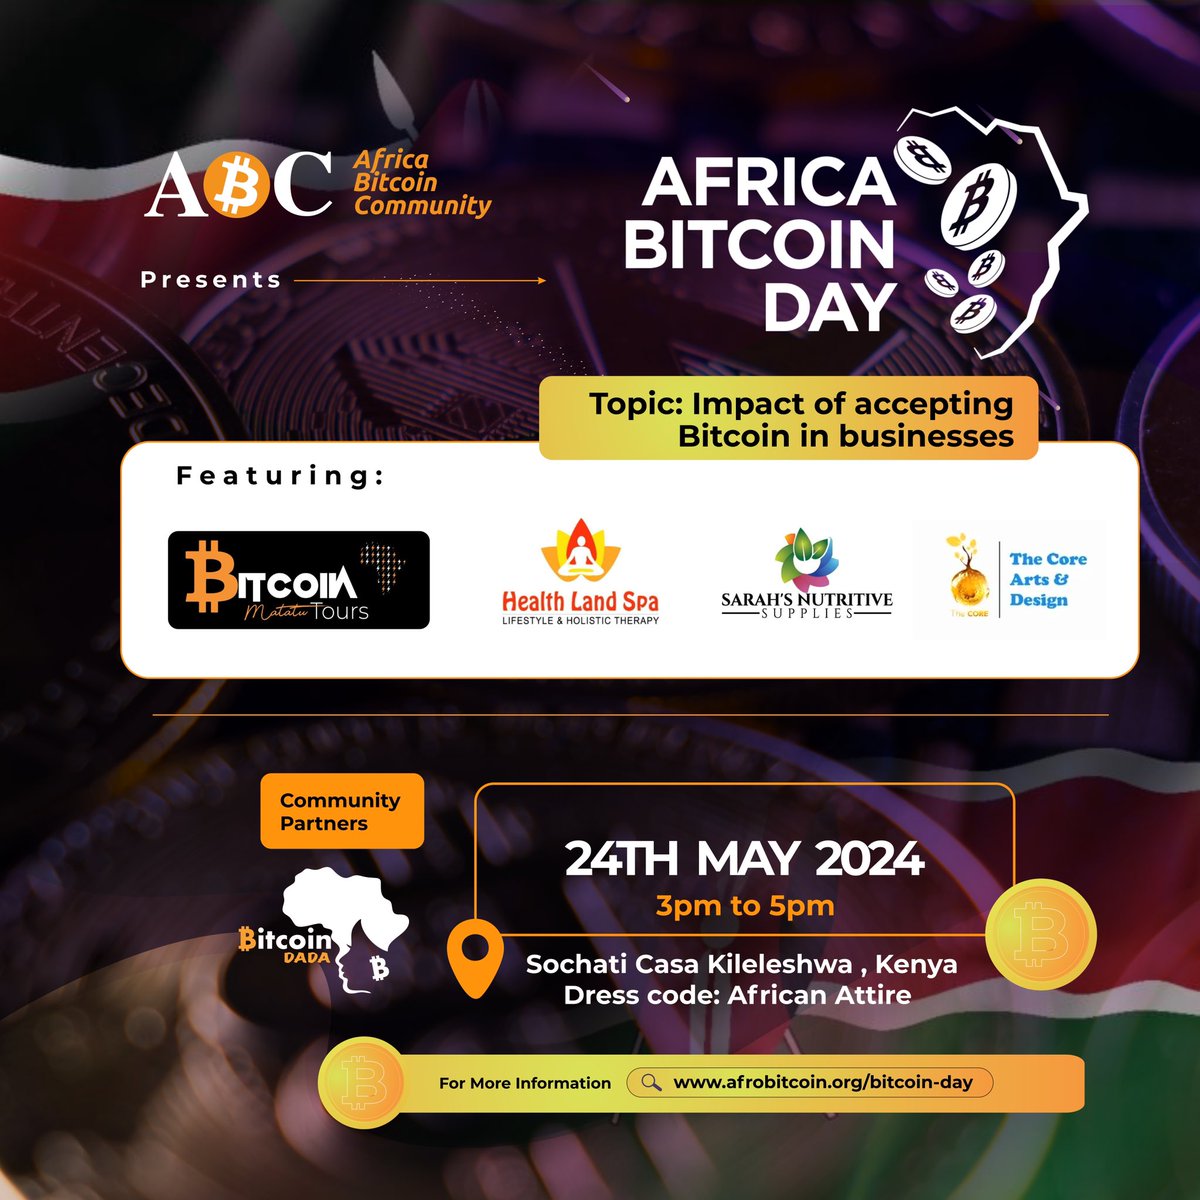 Here's a sneak peek at tomorrow's Africa Bitcoin Day panels. Are you ready? The program includes topics about #Bitcoin Adoption in Africa, Building on Bitcoin, and Bitcoin for businesses. About #Bitcoin  adoption in Africa, hear renowned speakers like @statusquont,